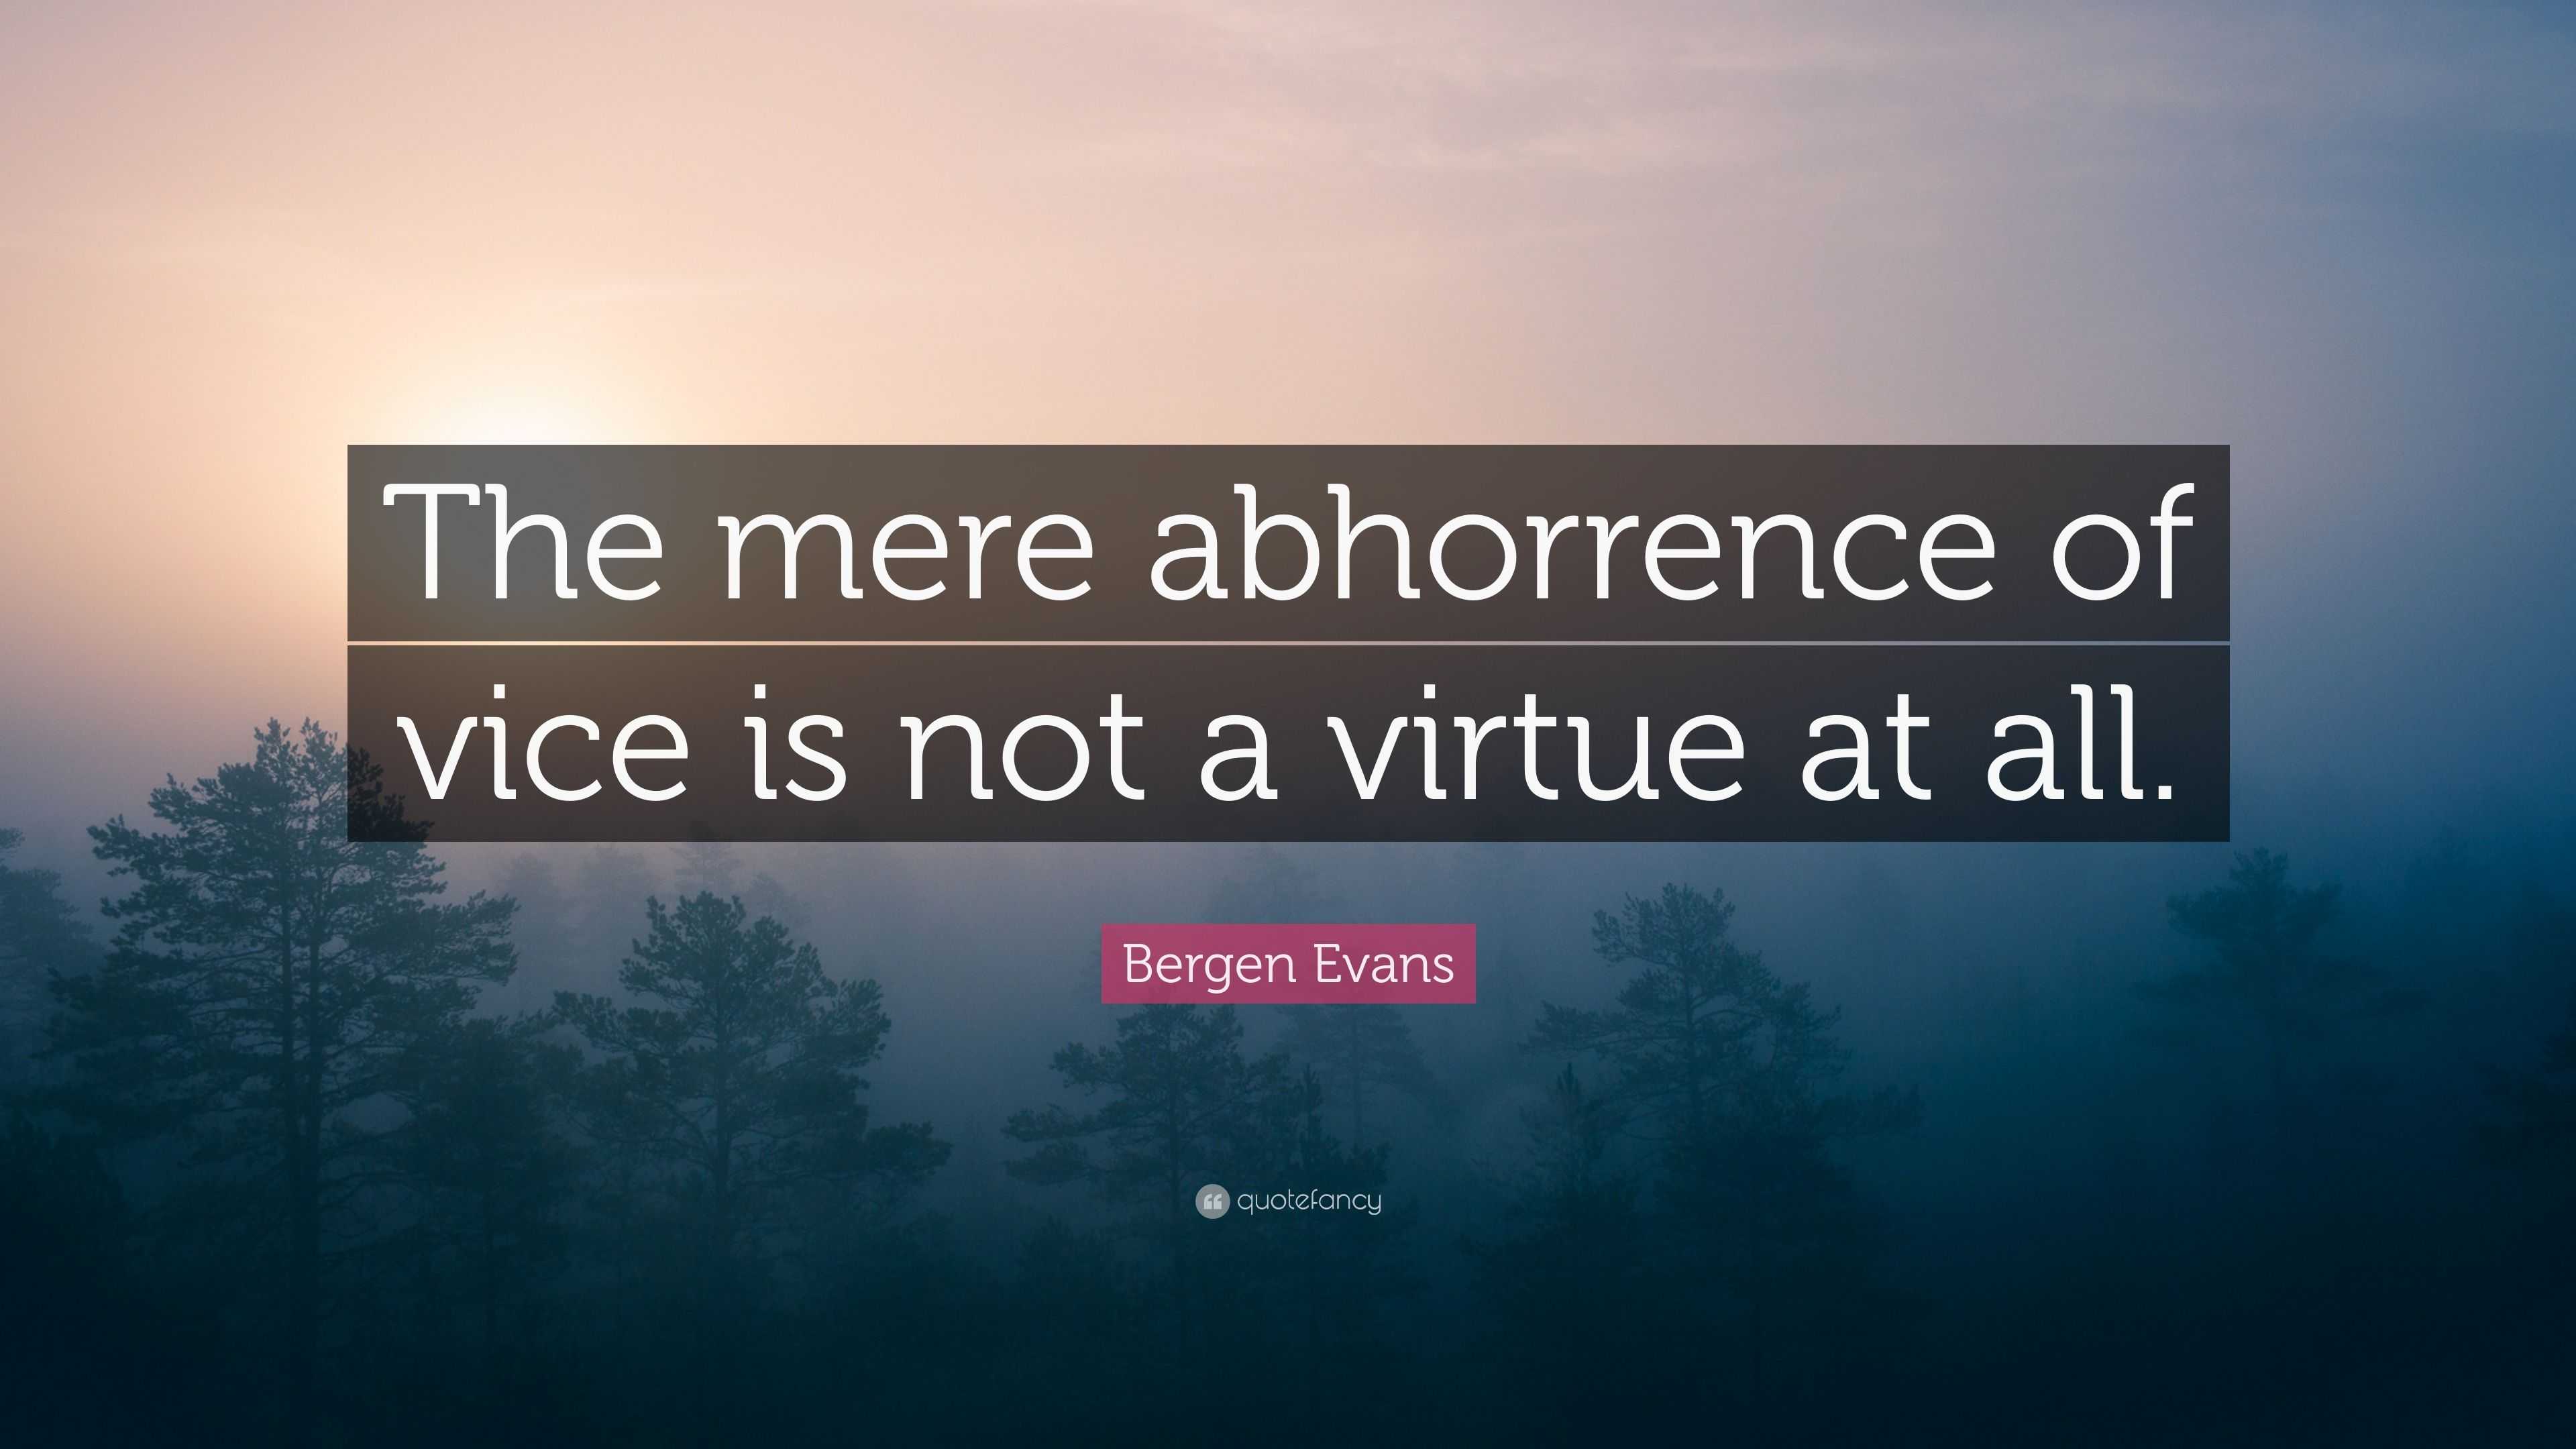 Bergen Evans Quote: “The mere abhorrence of vice is not a virtue at all.”